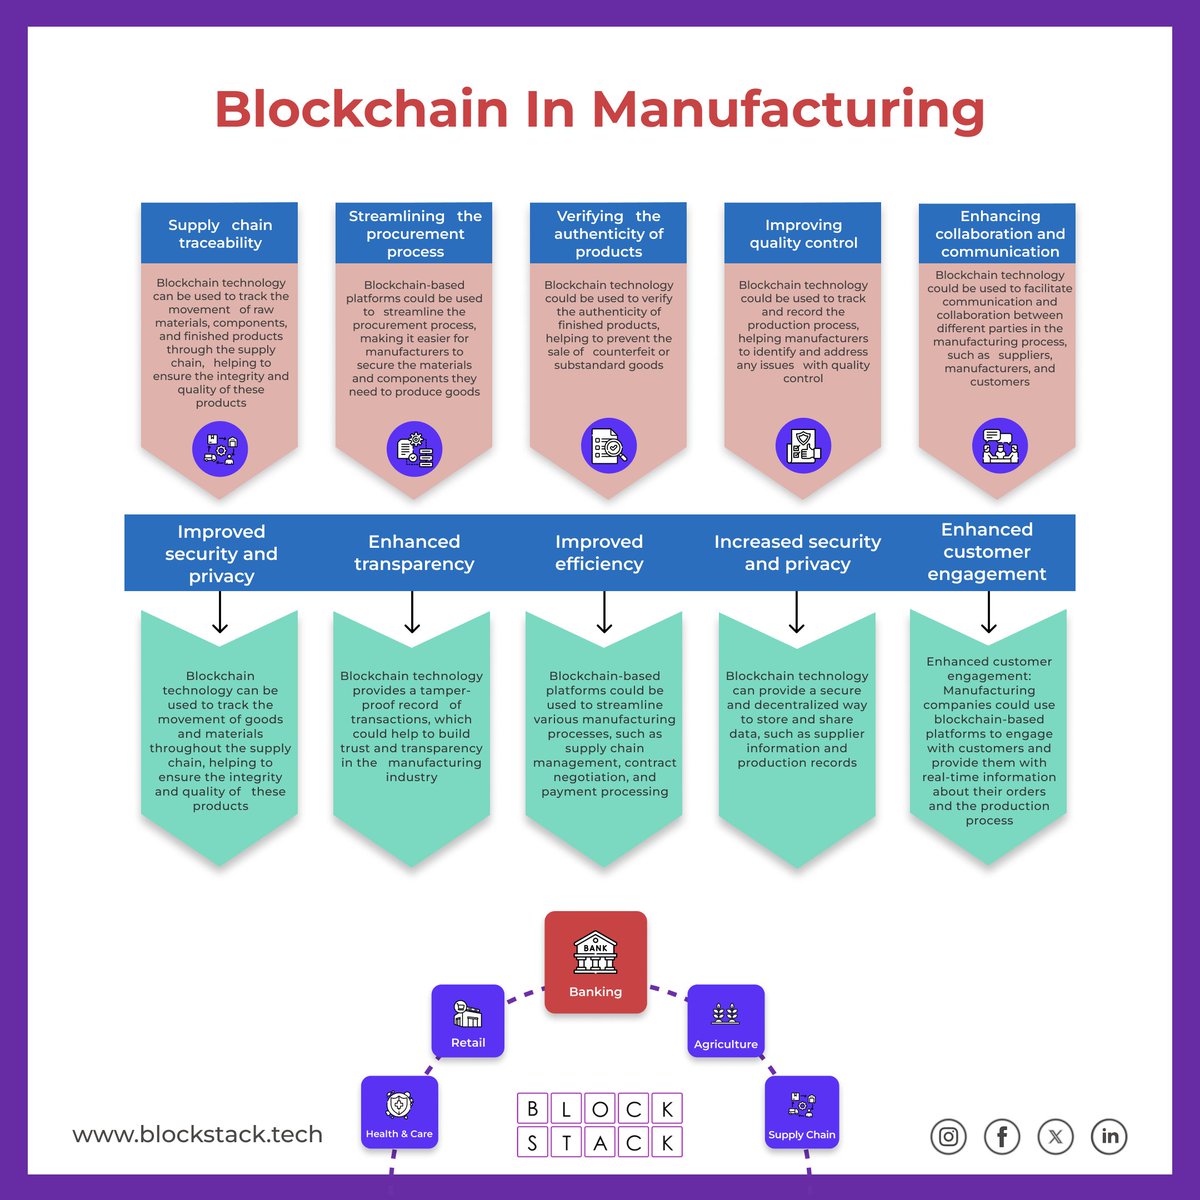 🧵#Blockchain is revolutionizing #Manufacturing! 🏭✨ From supply chain transparency to secure transactions, it’s changing the game. Let’s explore how this tech is making waves! 🌊 #TechTrends 

Explore Block Stack's Blockchain services here: blockstack.tech/blockchain/